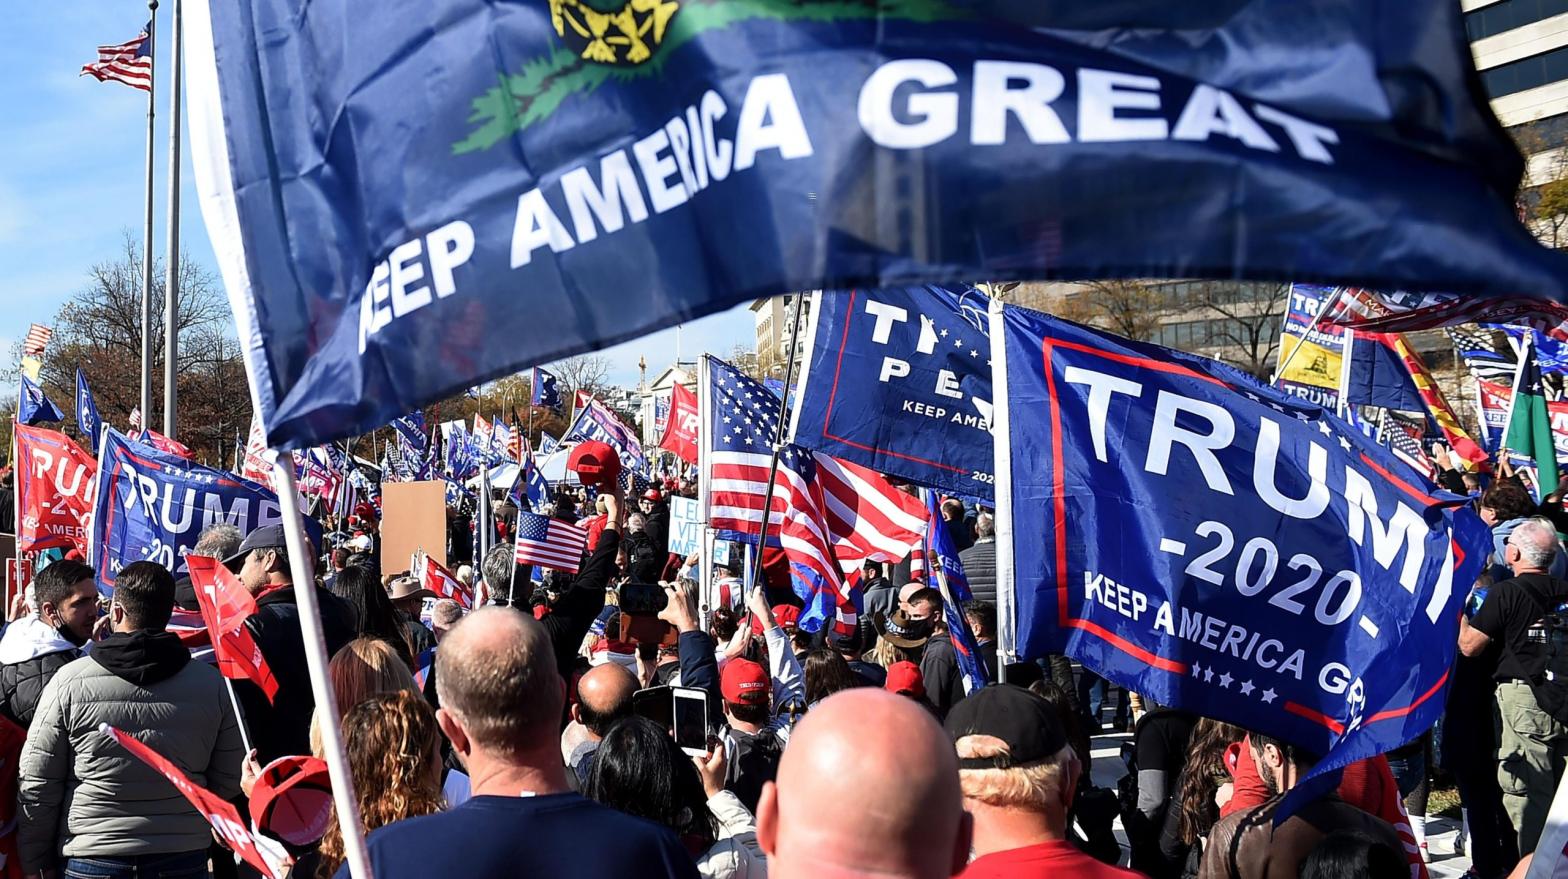 Trump supporters rally in Washington, DC on Nov. 14, 2020. (Photo: Olivier Douliery / AFP, Getty Images)